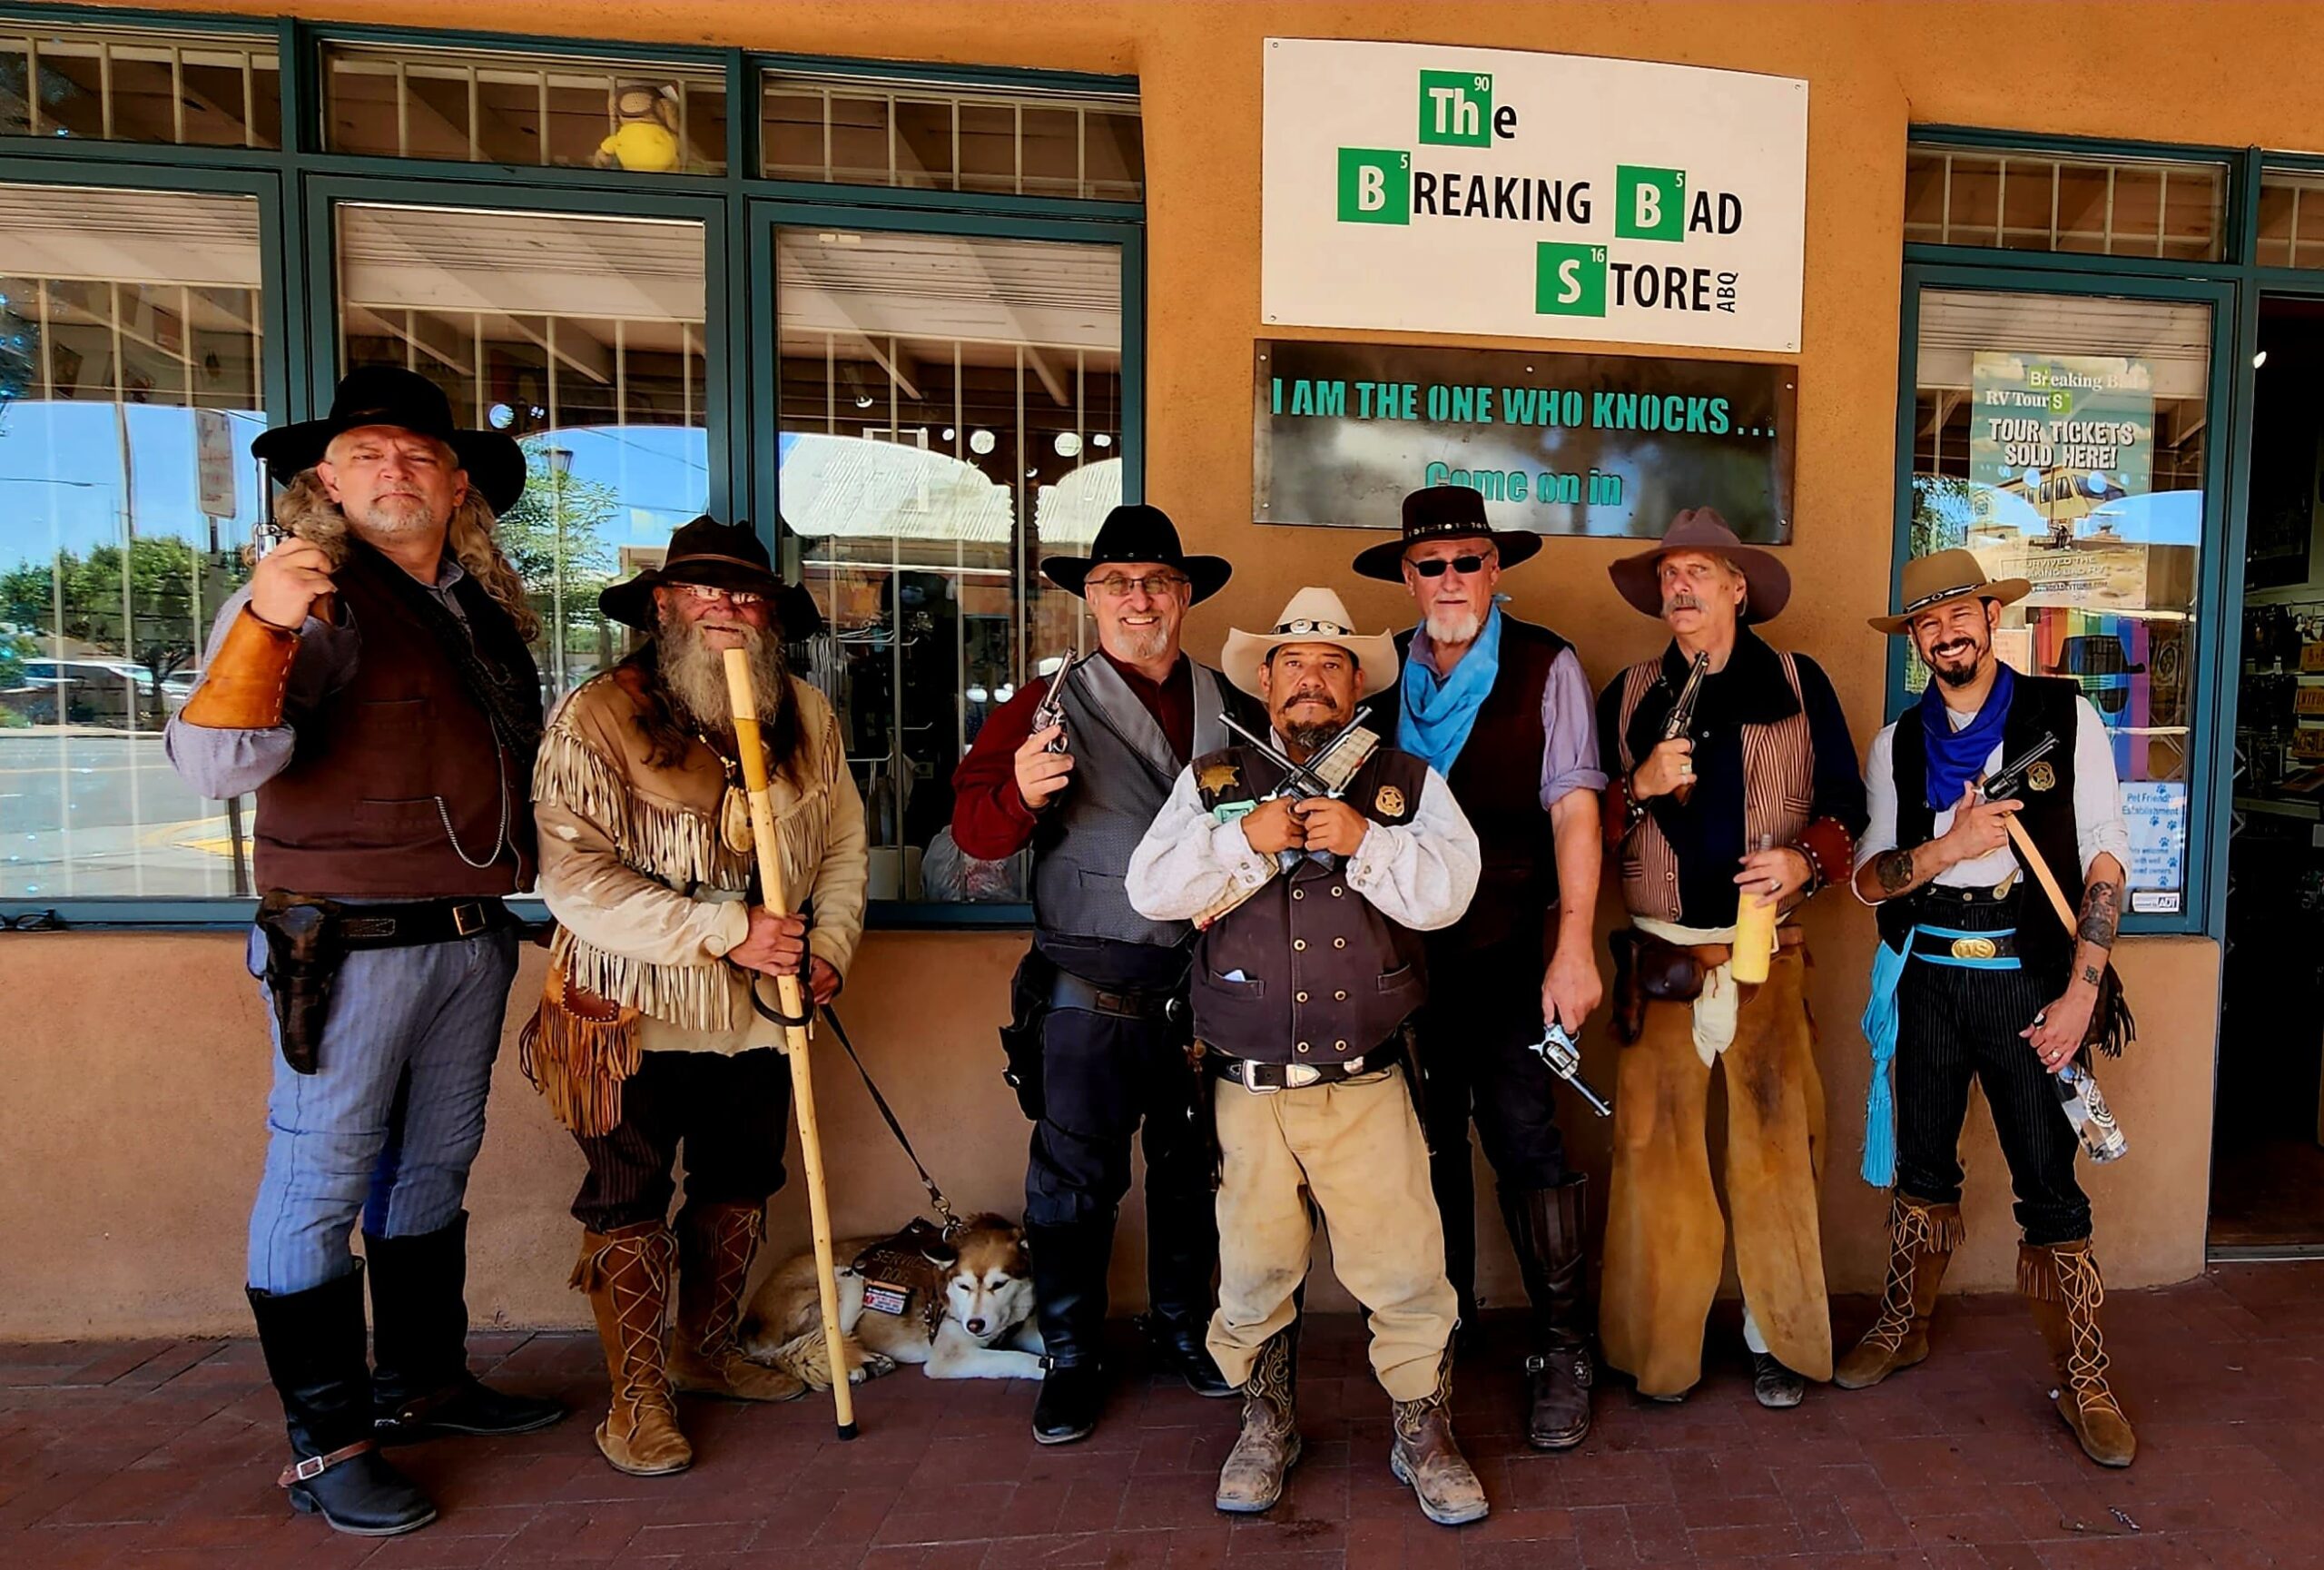 About the New Mexico Gunfighters